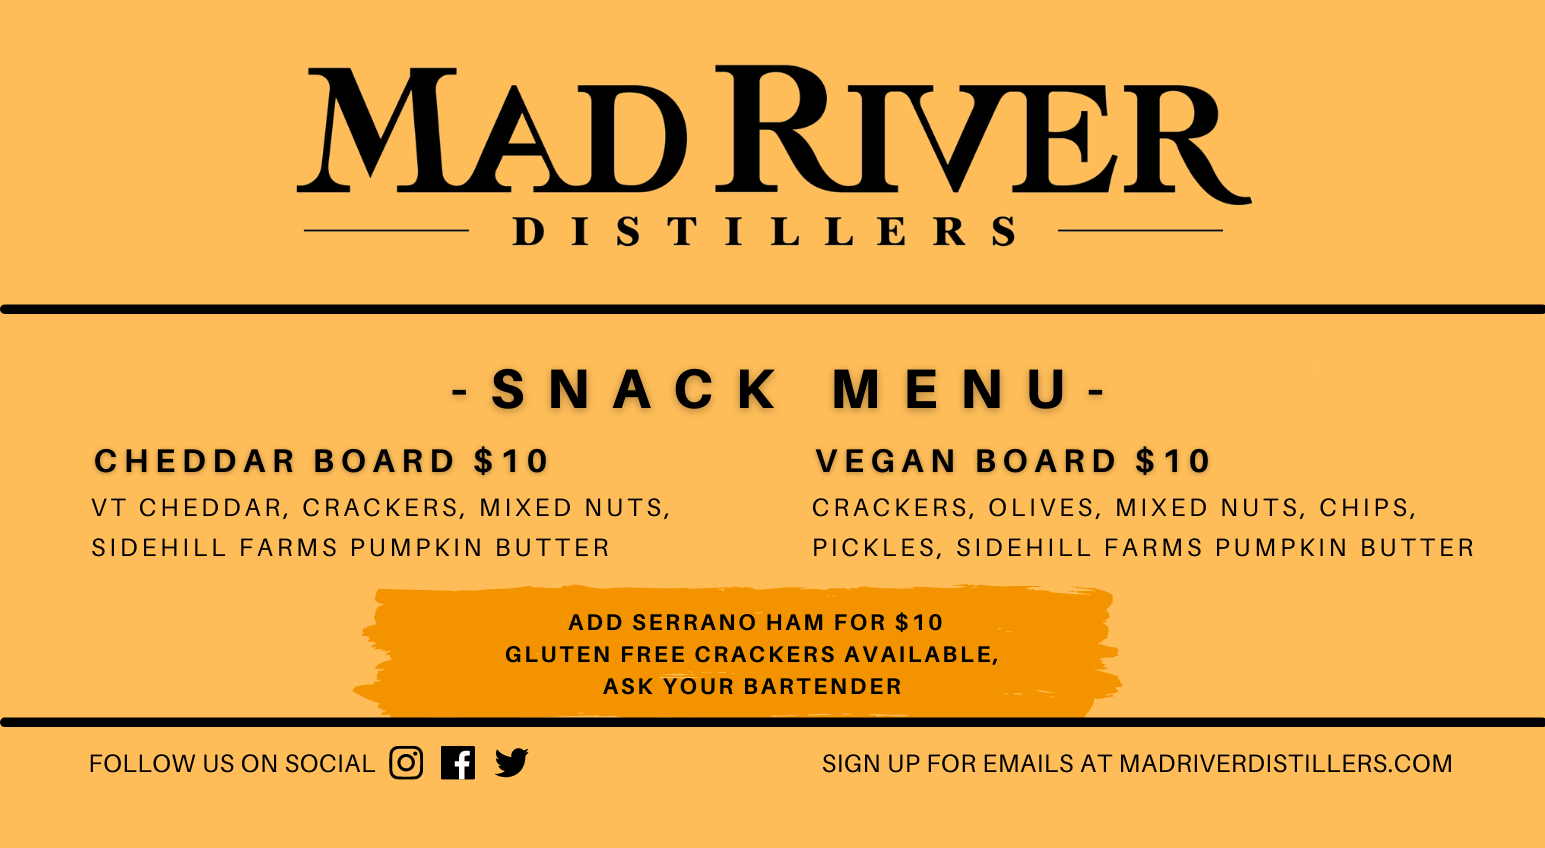 Snack Menu: Cheddar Board with VT Cheddar, Sidehill Farms Pumpkin Butter, Crackers and Mixed Nuts for $10. Vegan Board with Crackers, Sidehill Farms Pumpkin Butter, Olives, Mixed Nuts, Pickles and Chips for $10. Add Serrano Ham for $10. Gluten free crackers are available, ask your bartender.